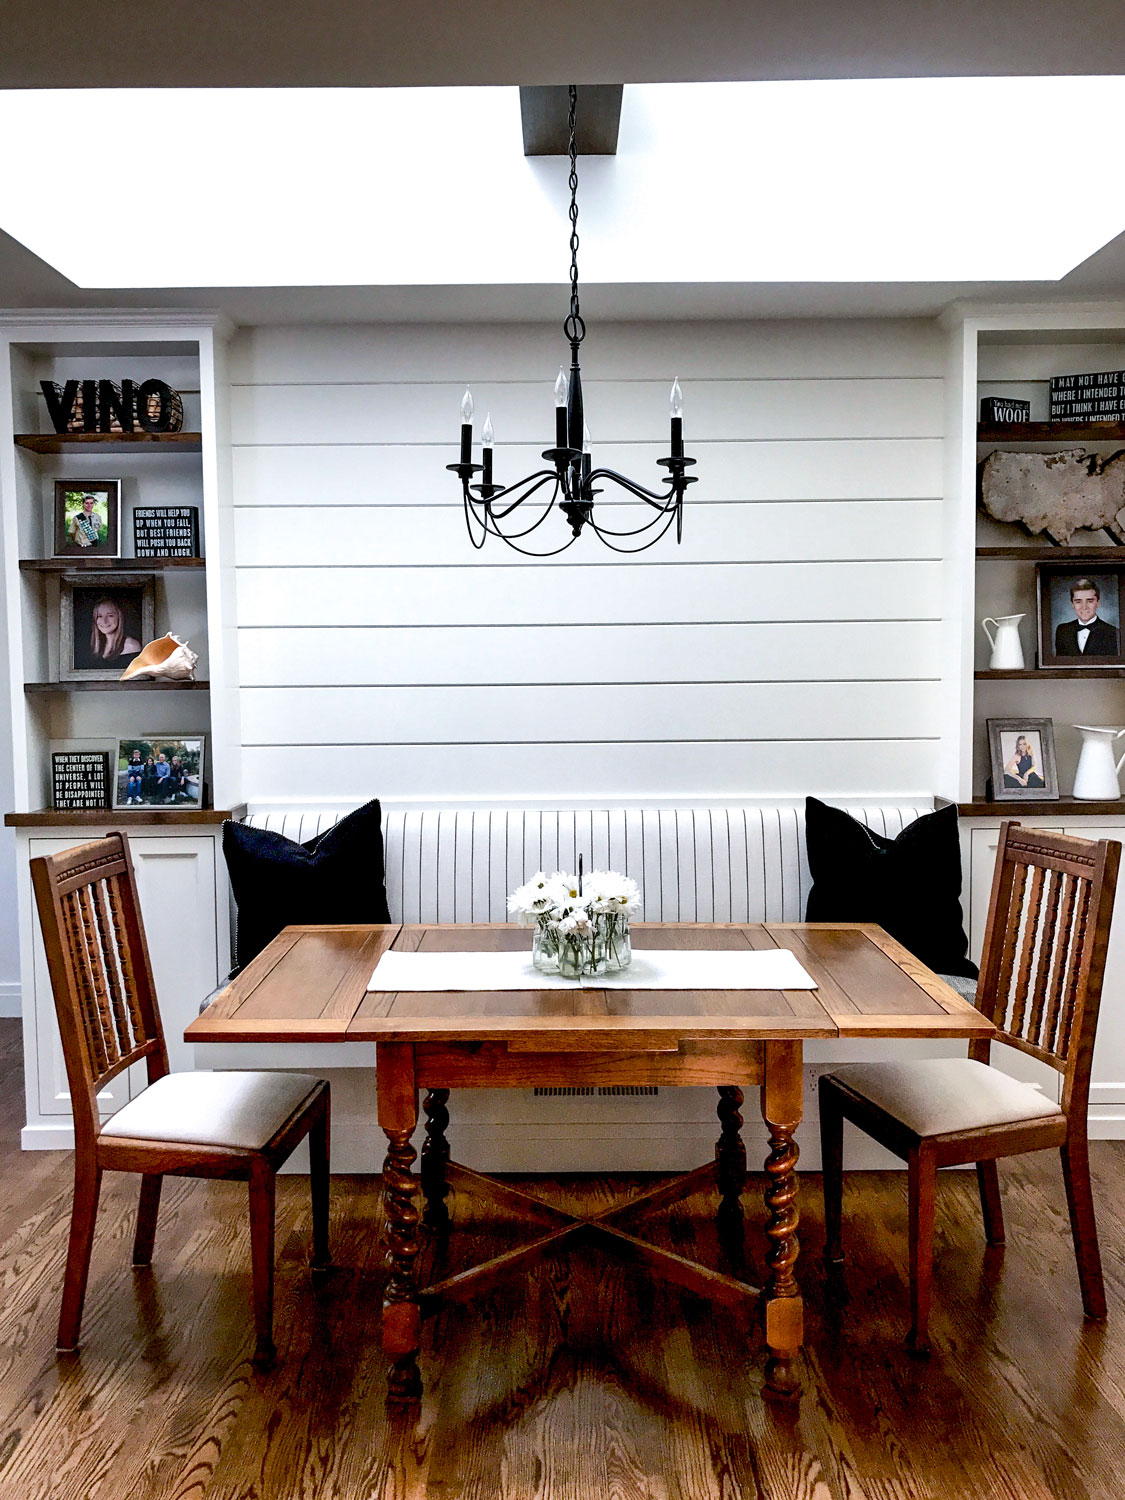 built-in banquette black and white